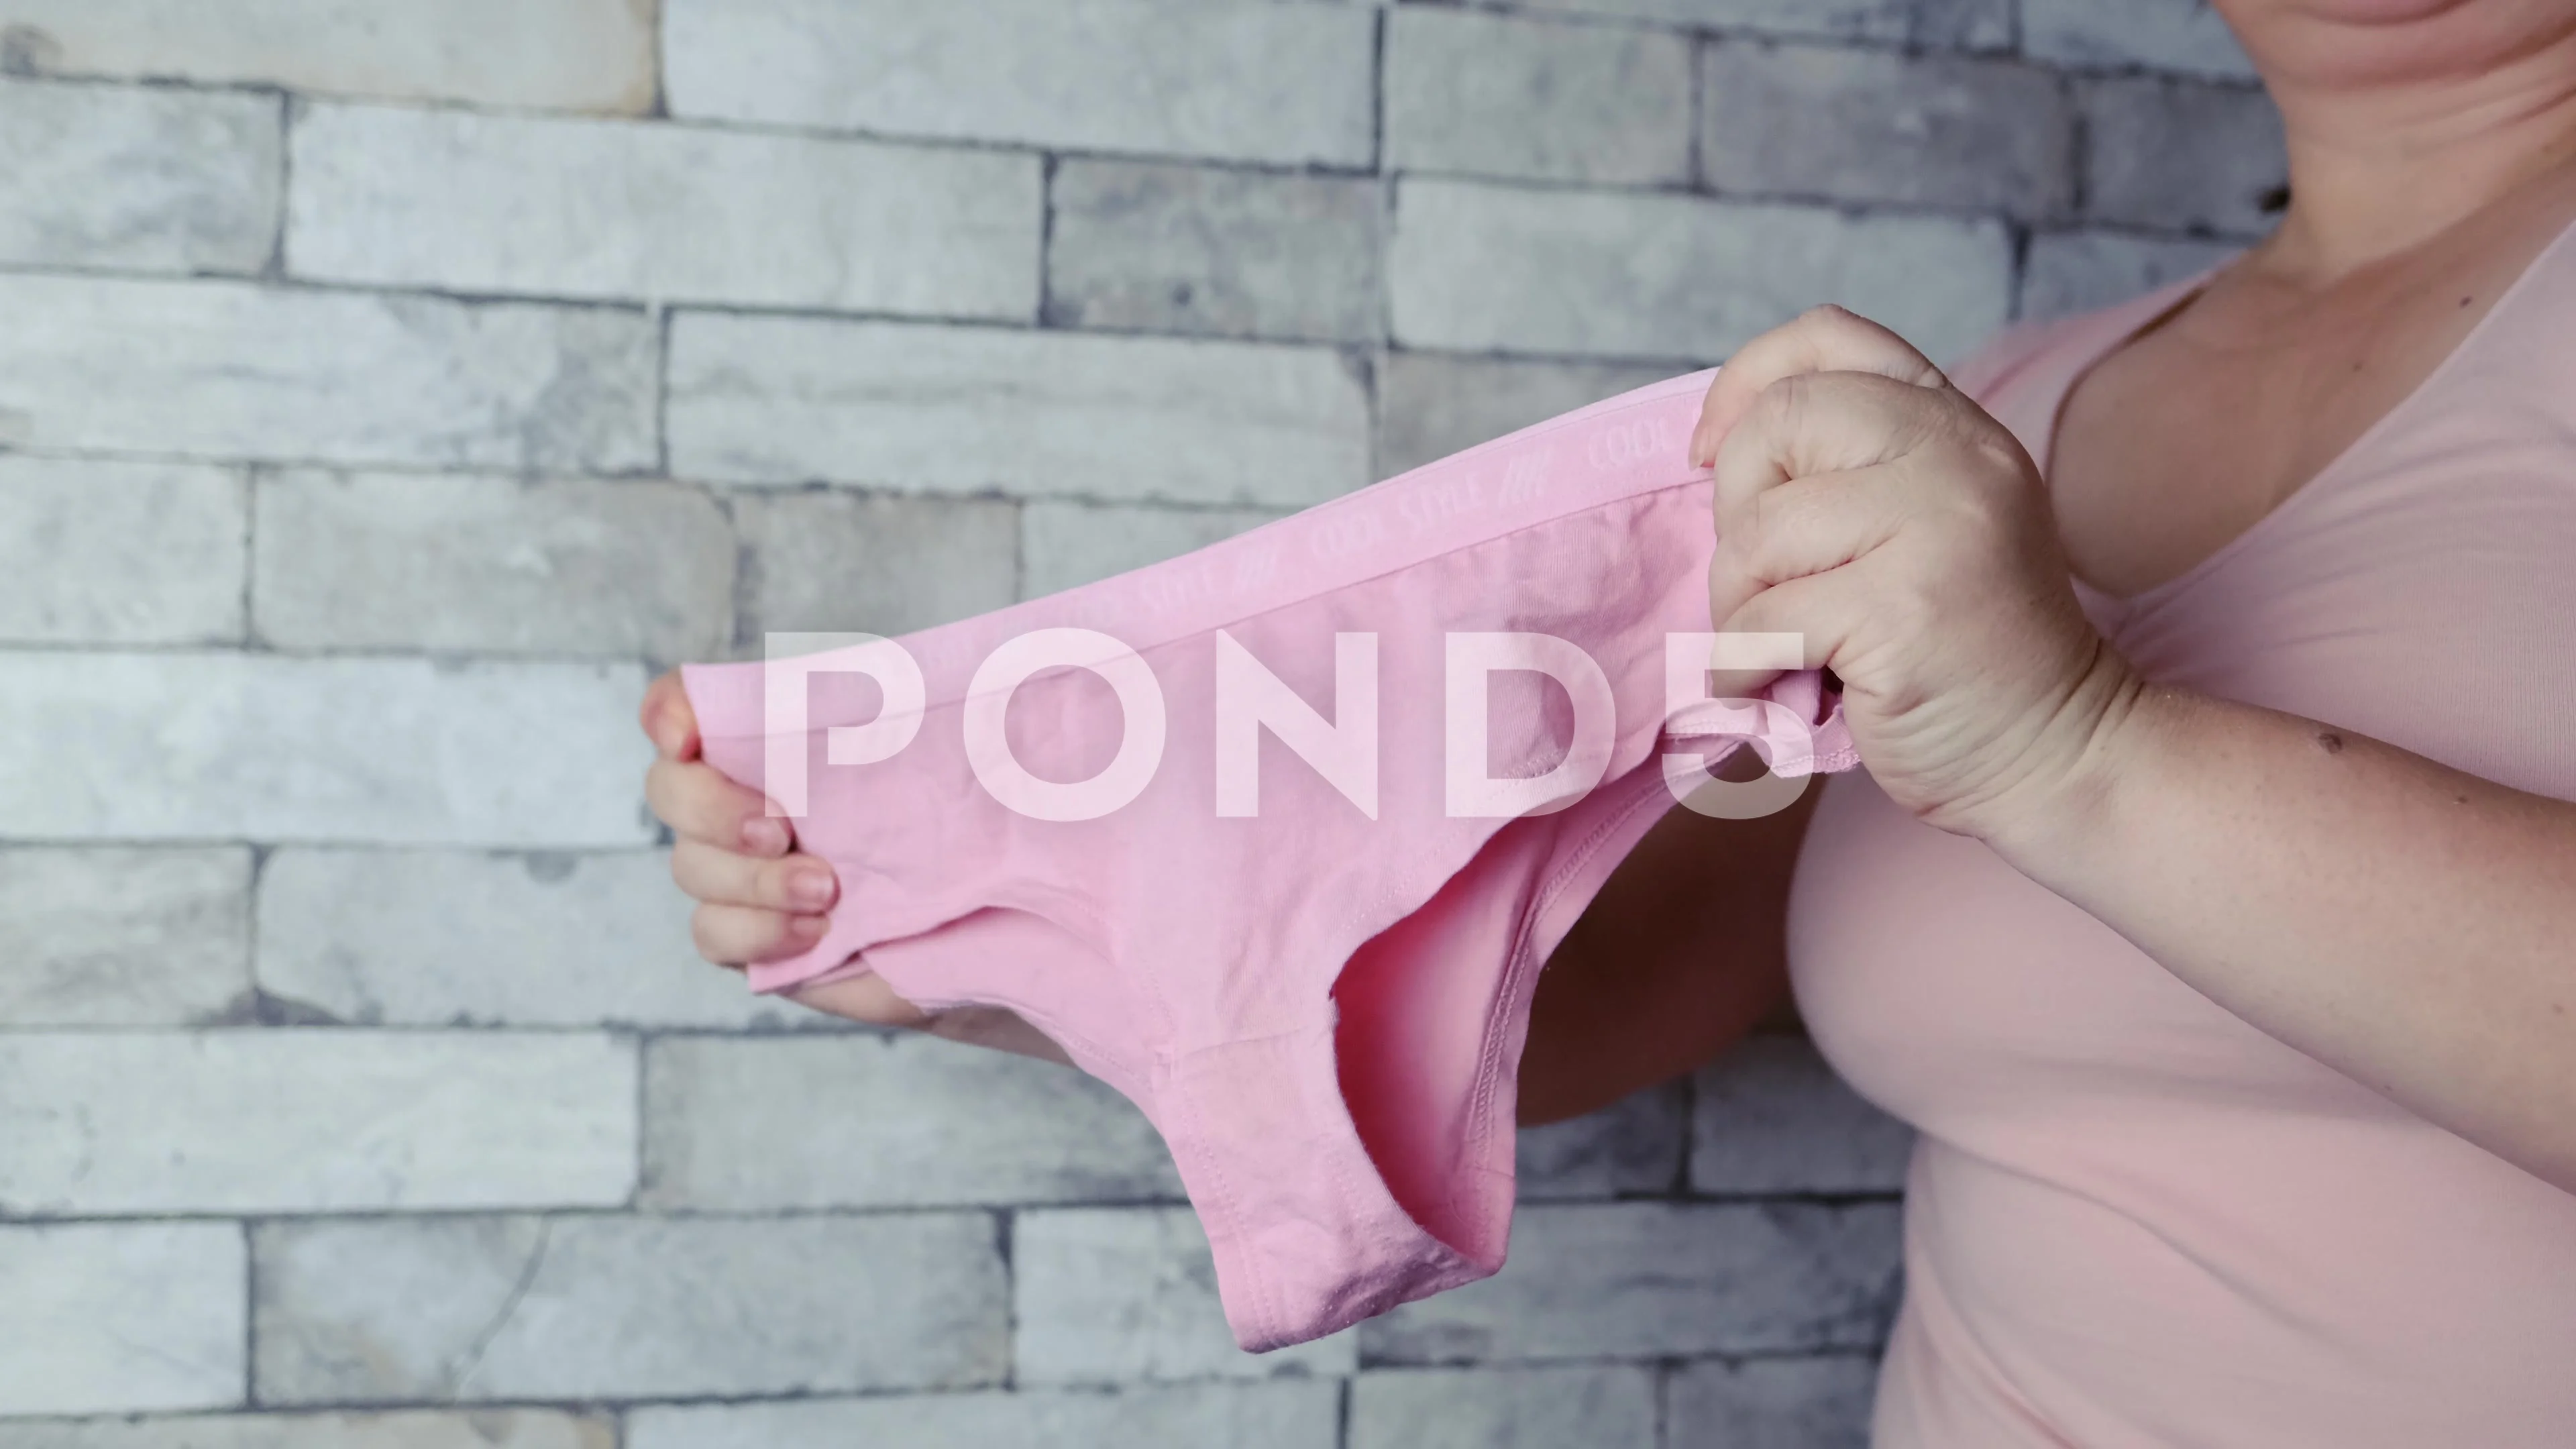 How to Properly Wash Bras and Underwear - How to Laundry PantiesHelloGiggles